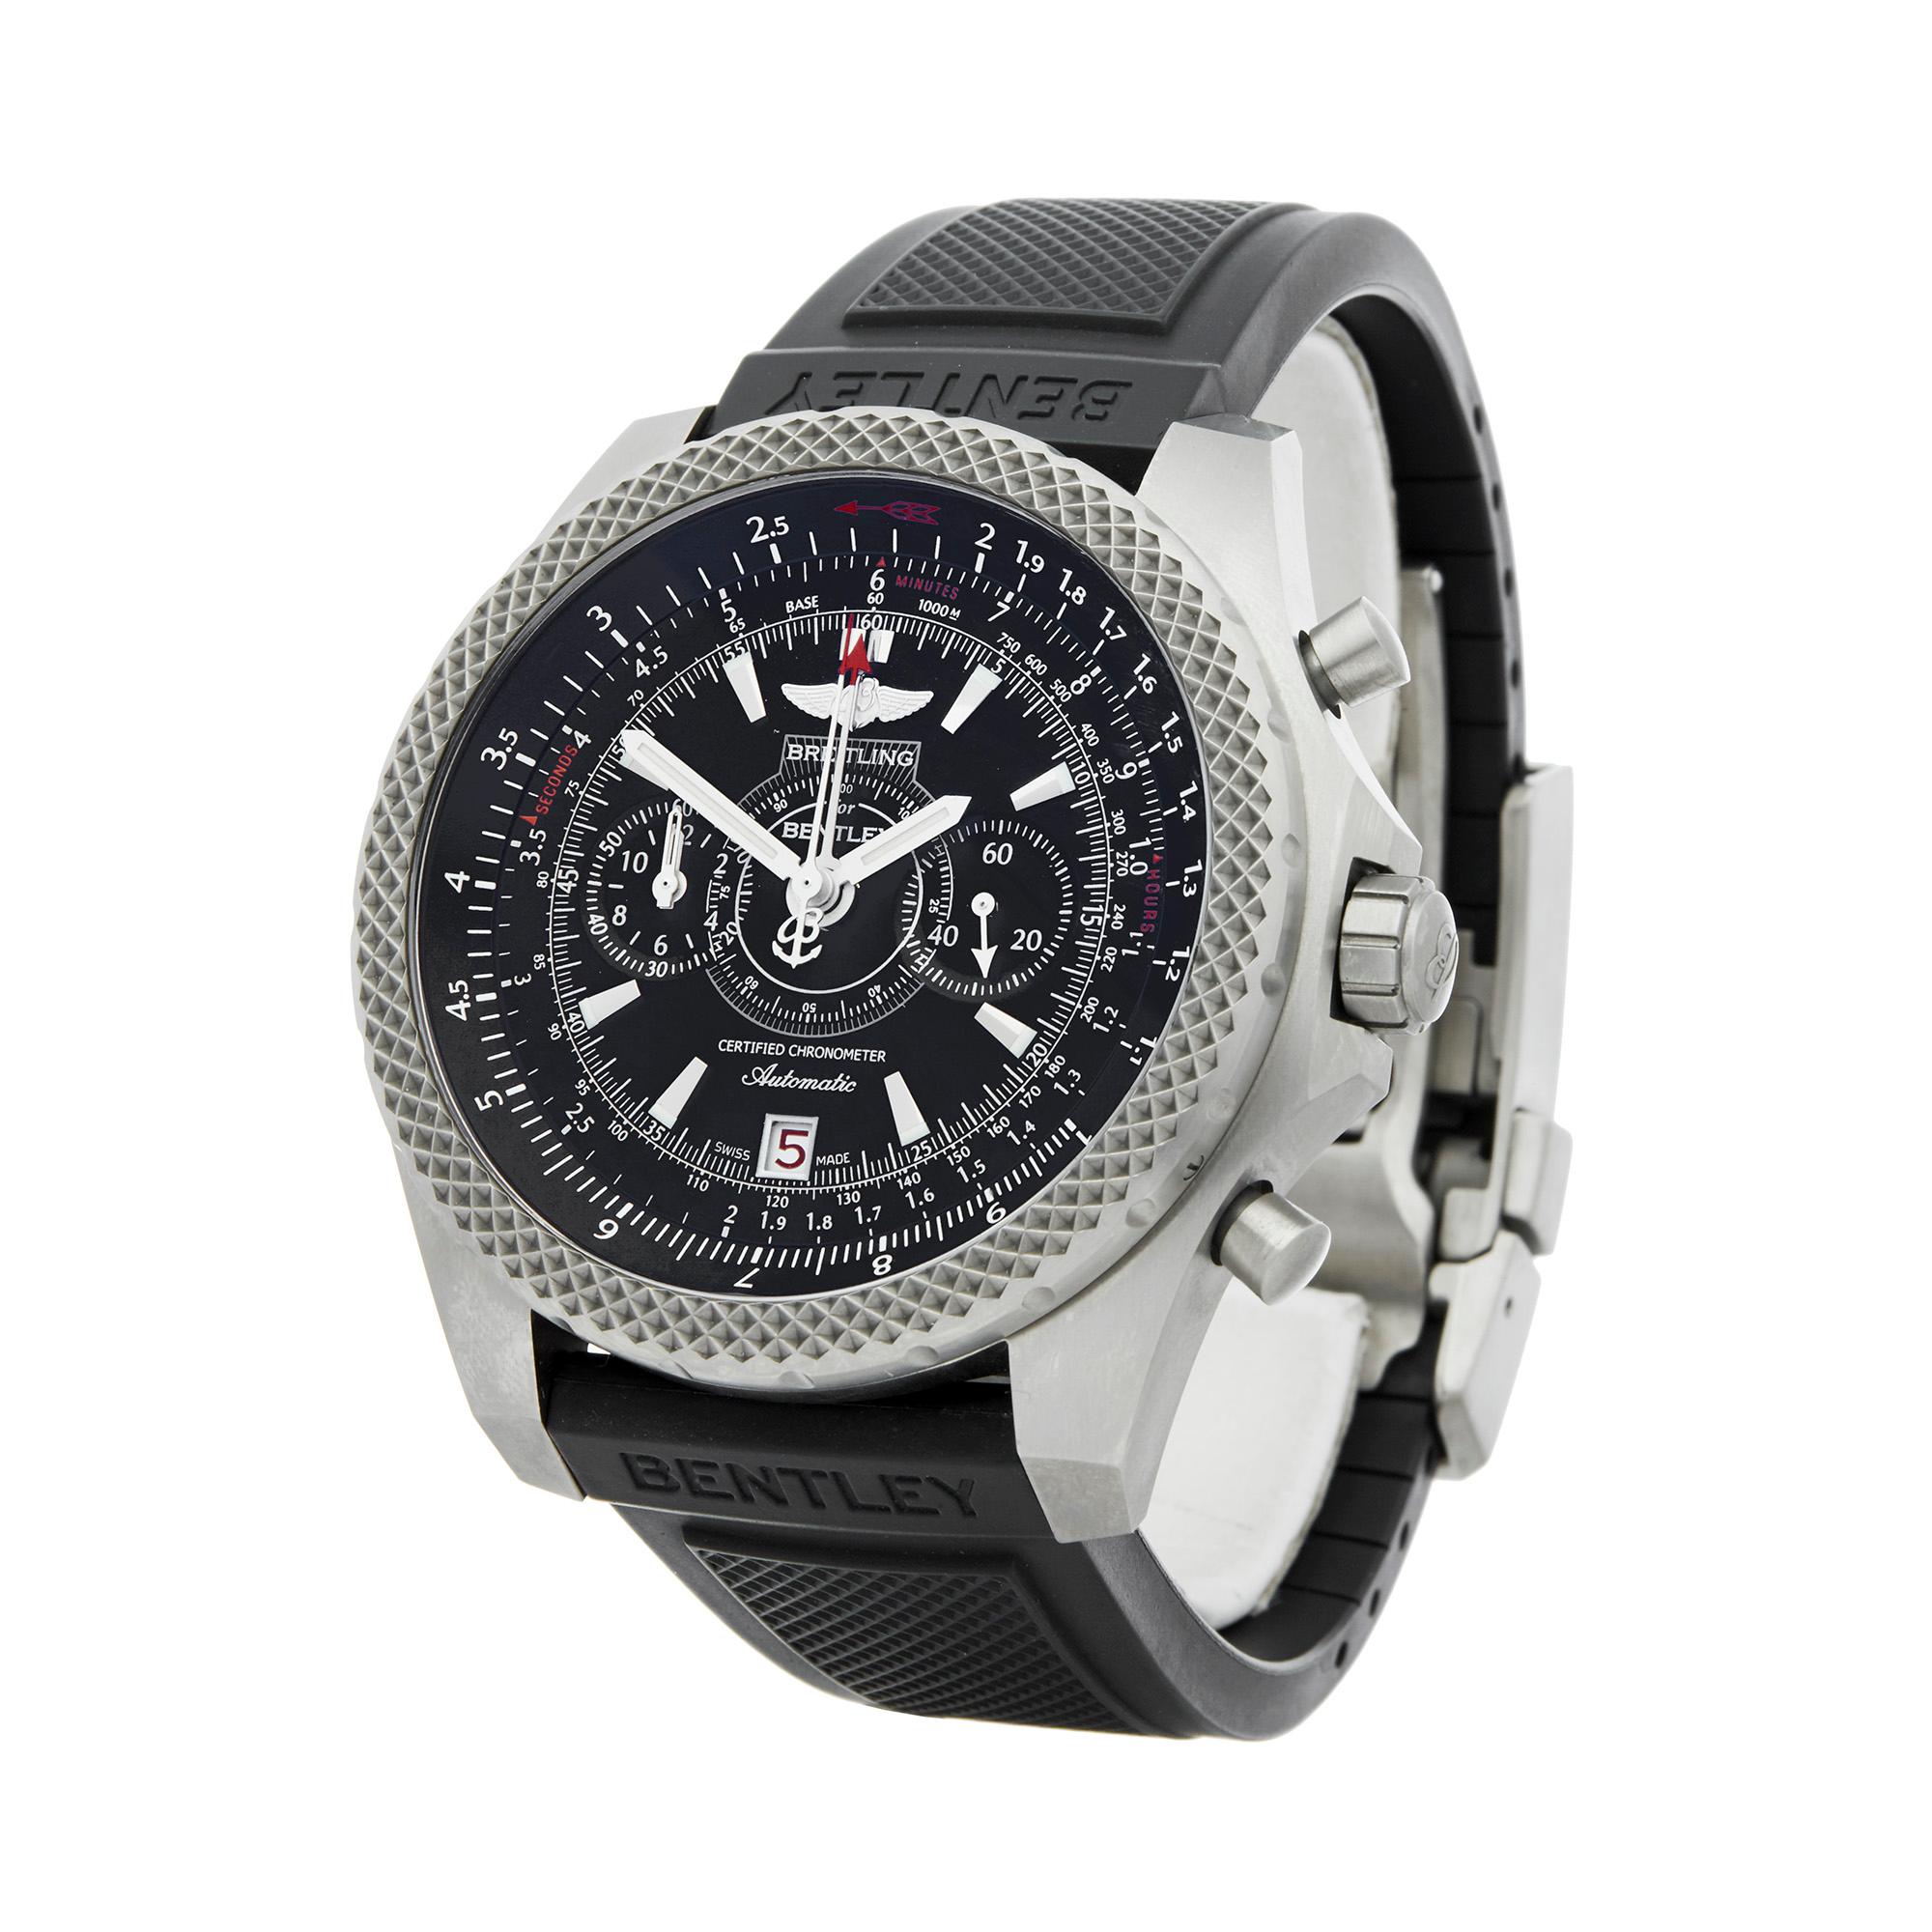 Reference: COM2015
Manufacturer: Breitling
Model: Supersports
Model Reference: E2736522
Age: 16th April 2016
Gender: Men's
Box and Papers: Box, Manuals and Guarantee
Dial: Black Baton
Glass: Sapphire Crystal
Movement: Automatic
Water Resistance: To